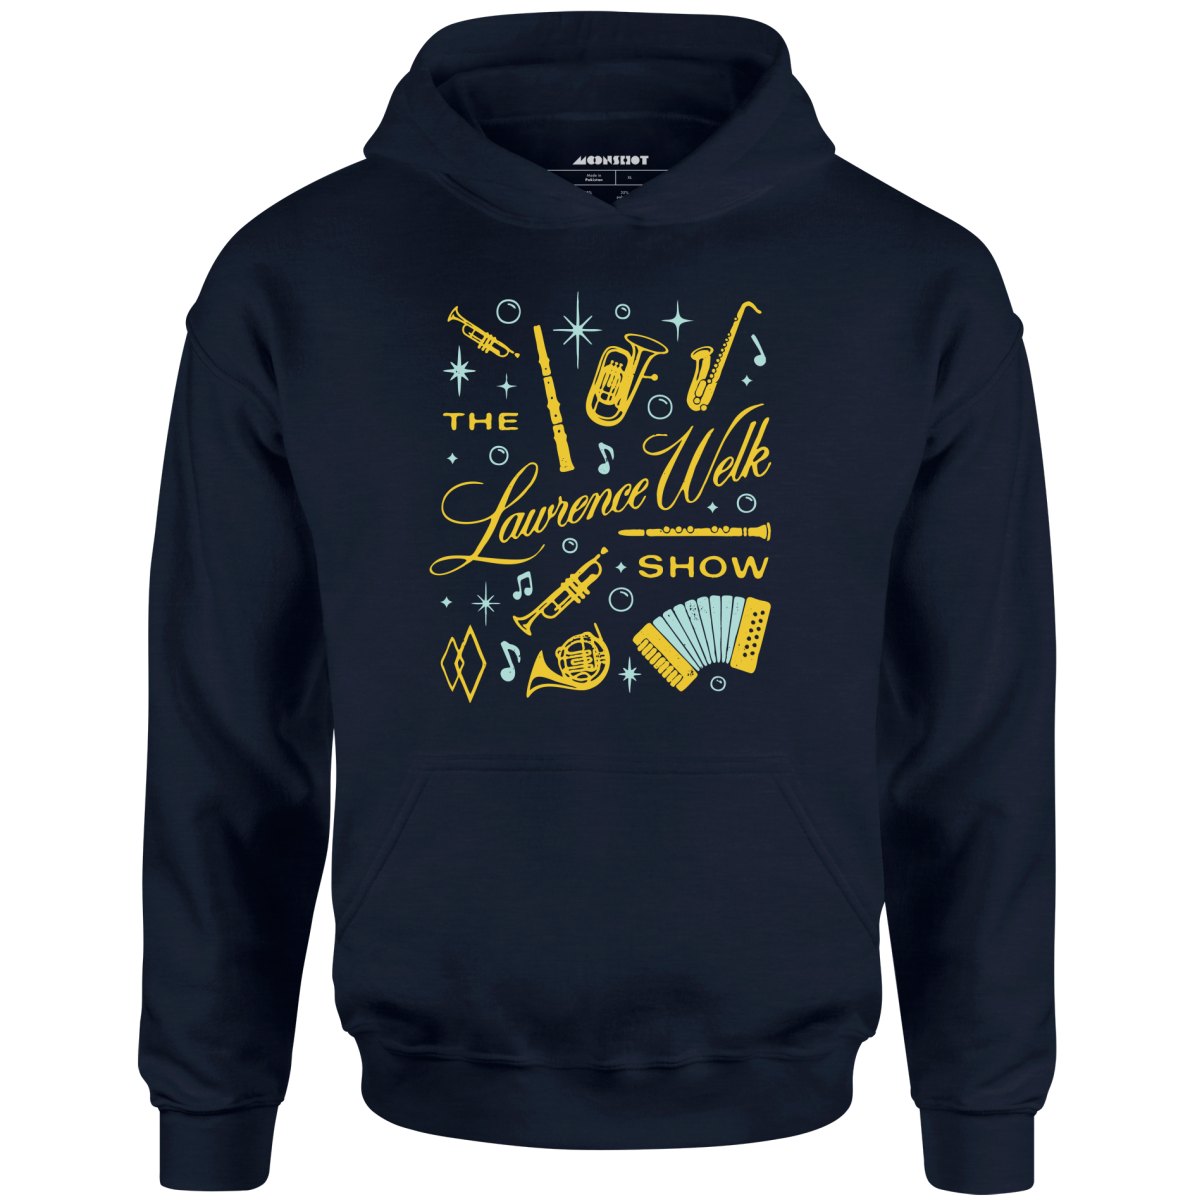 The Lawrence Welk Show - Unisex Hoodie